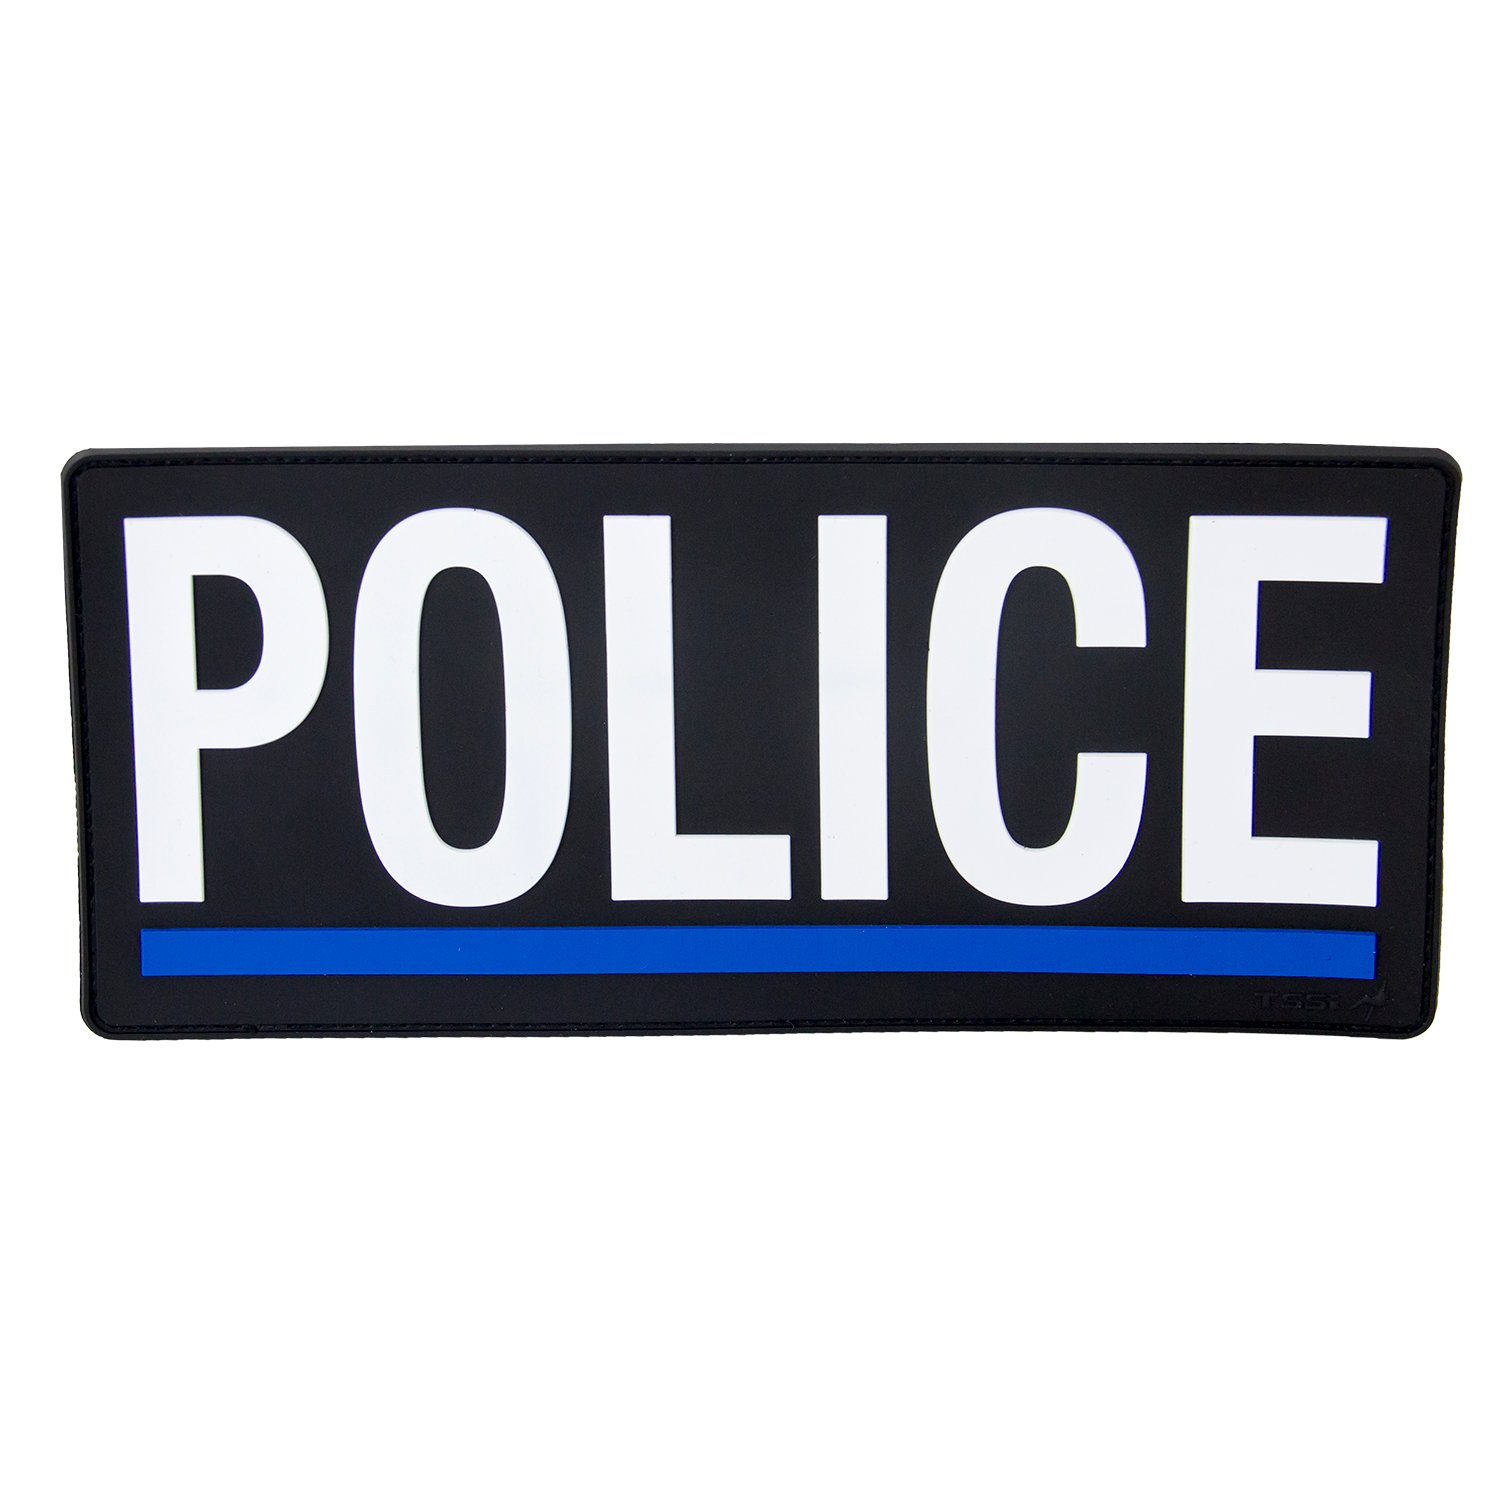 Police_patch_large_1500x1500.jpg